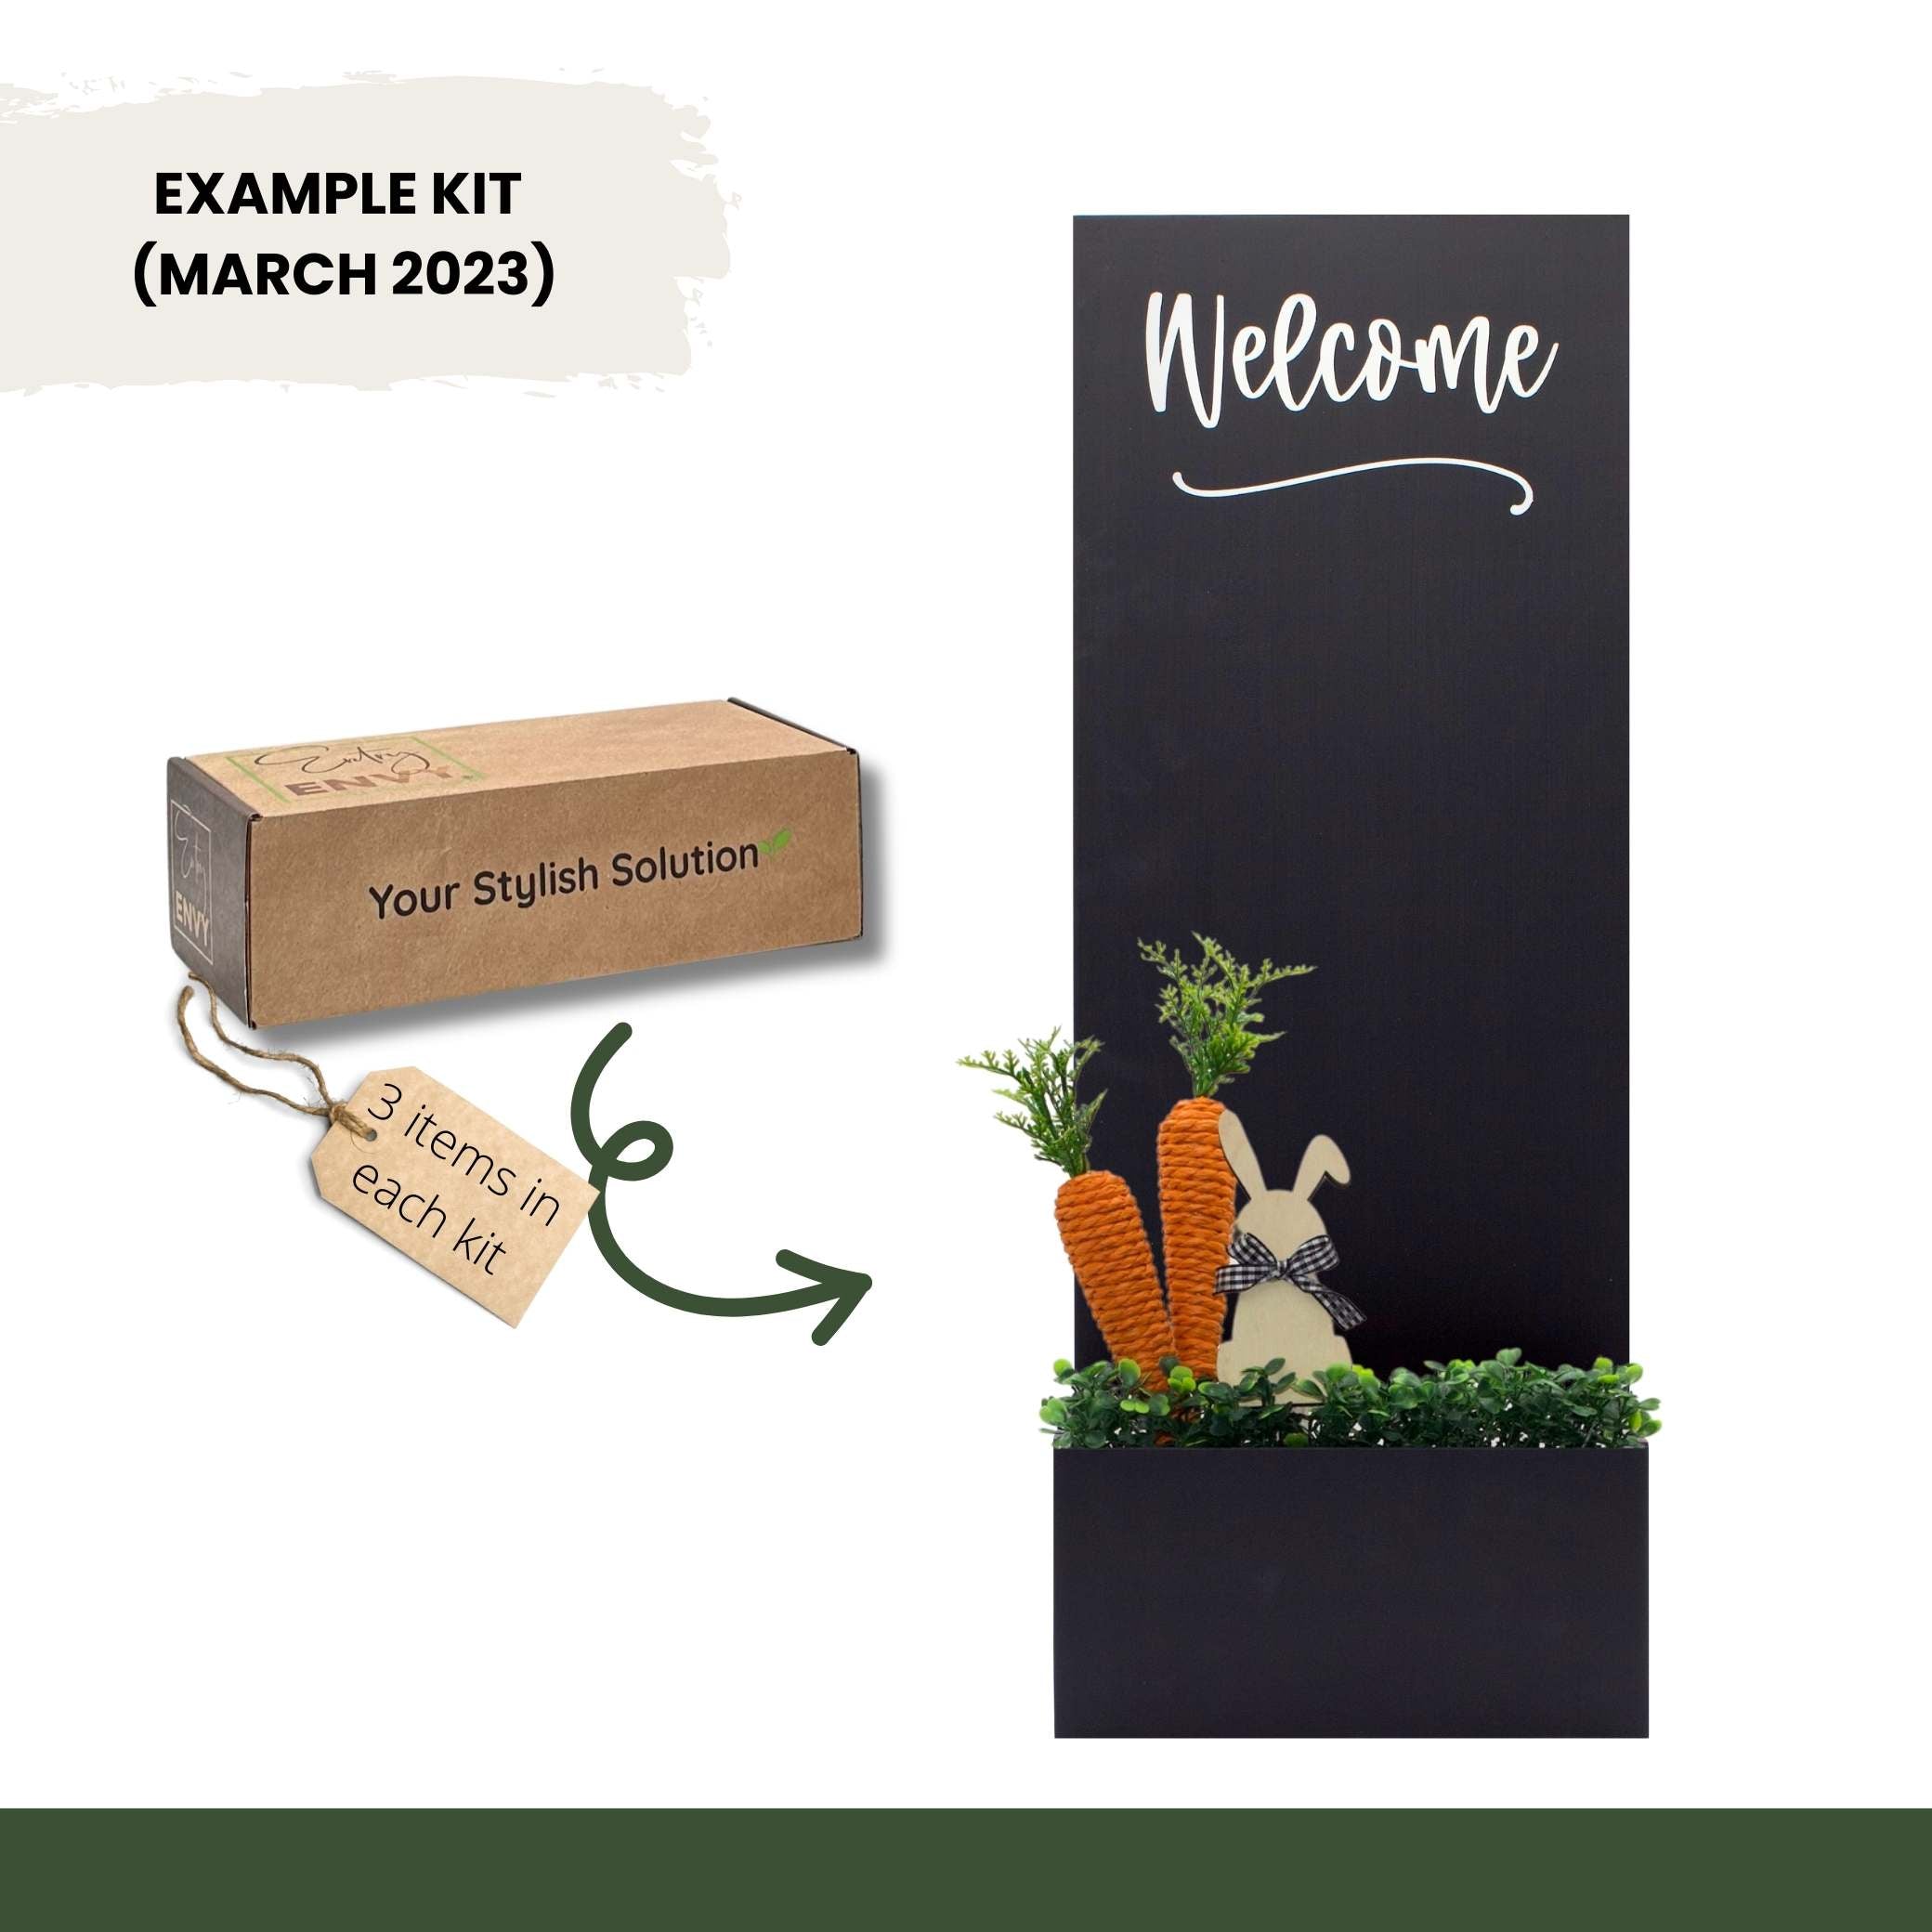 EXCLUSIVE DECOR KITS - GIFT SUBSCRIPTION